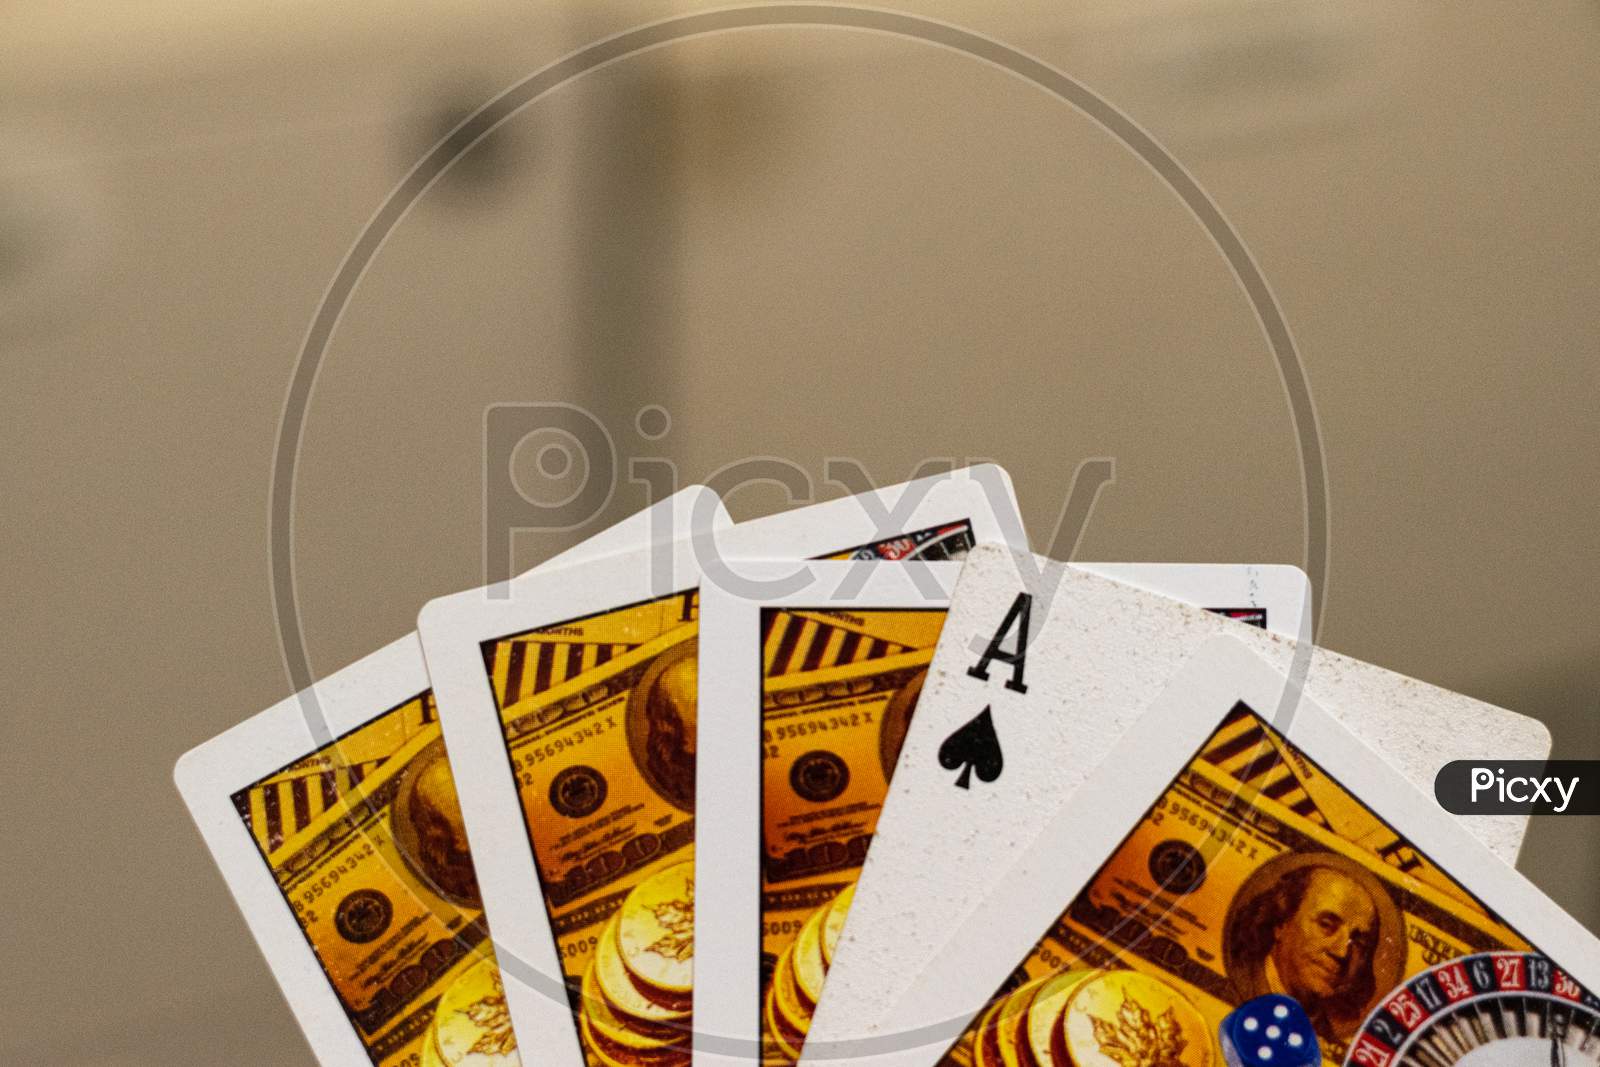 Ace of spades placed among the other playing cards